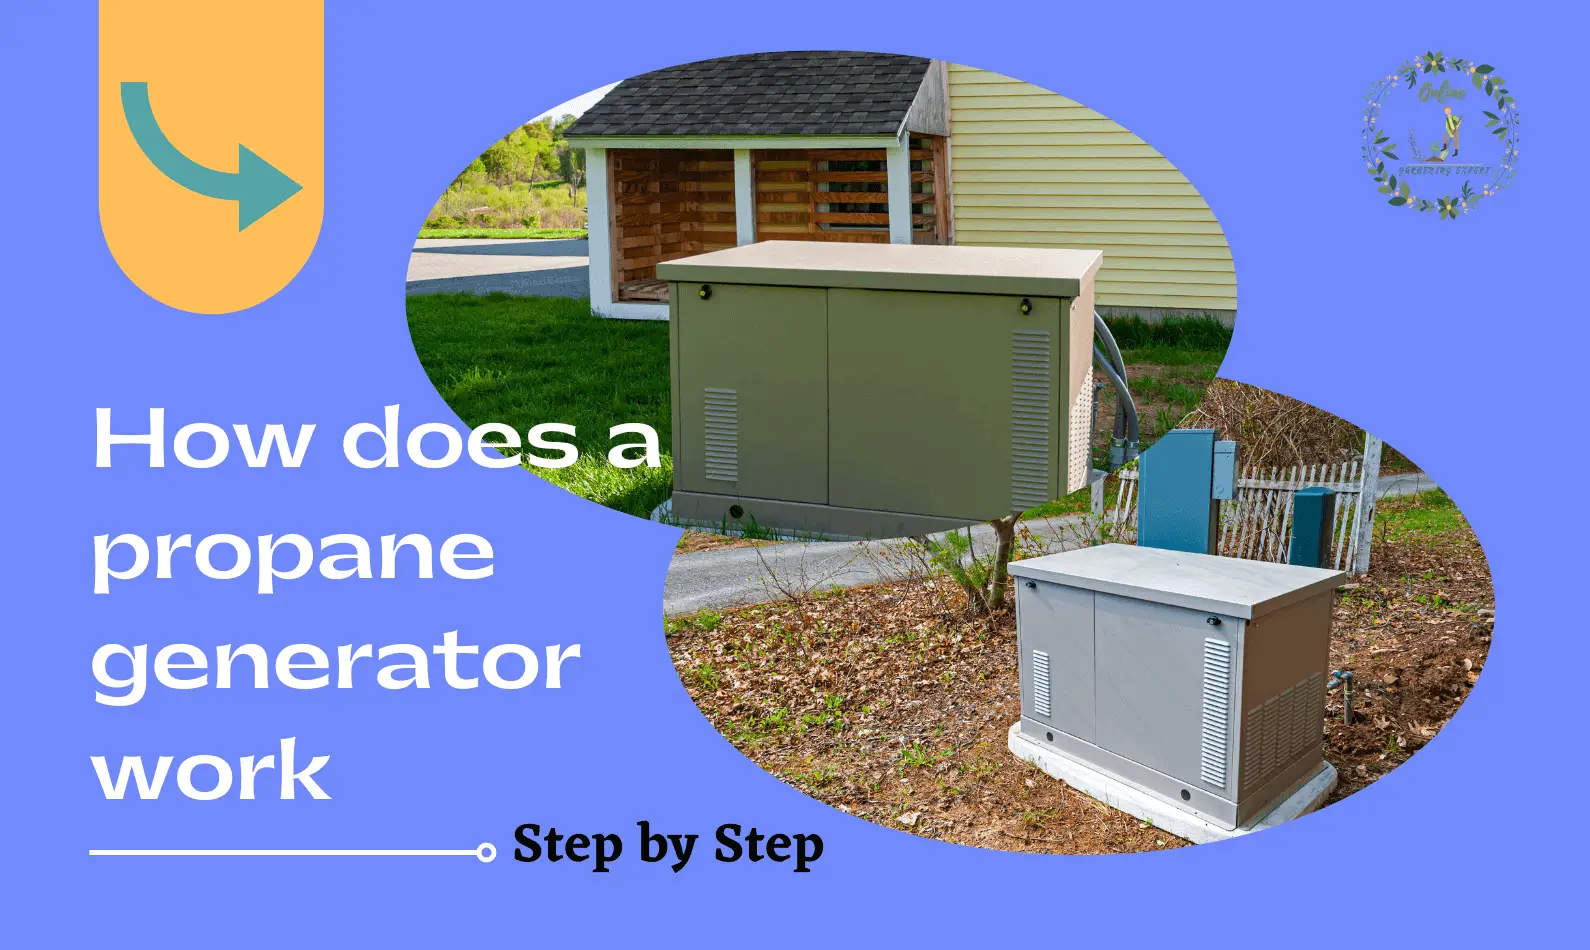 How Does a Propane Generator Work?